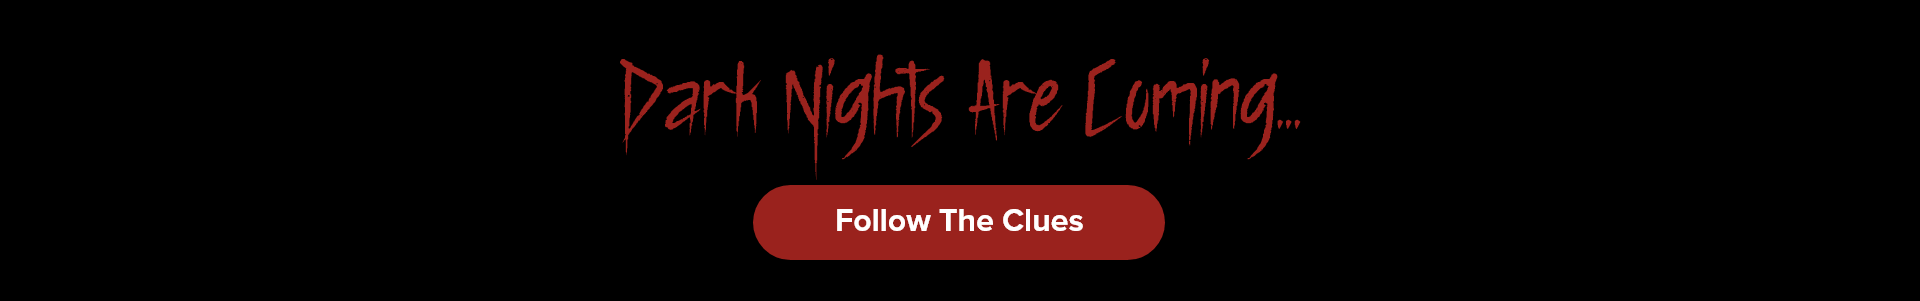 Dark Nights are Coming follow the clues